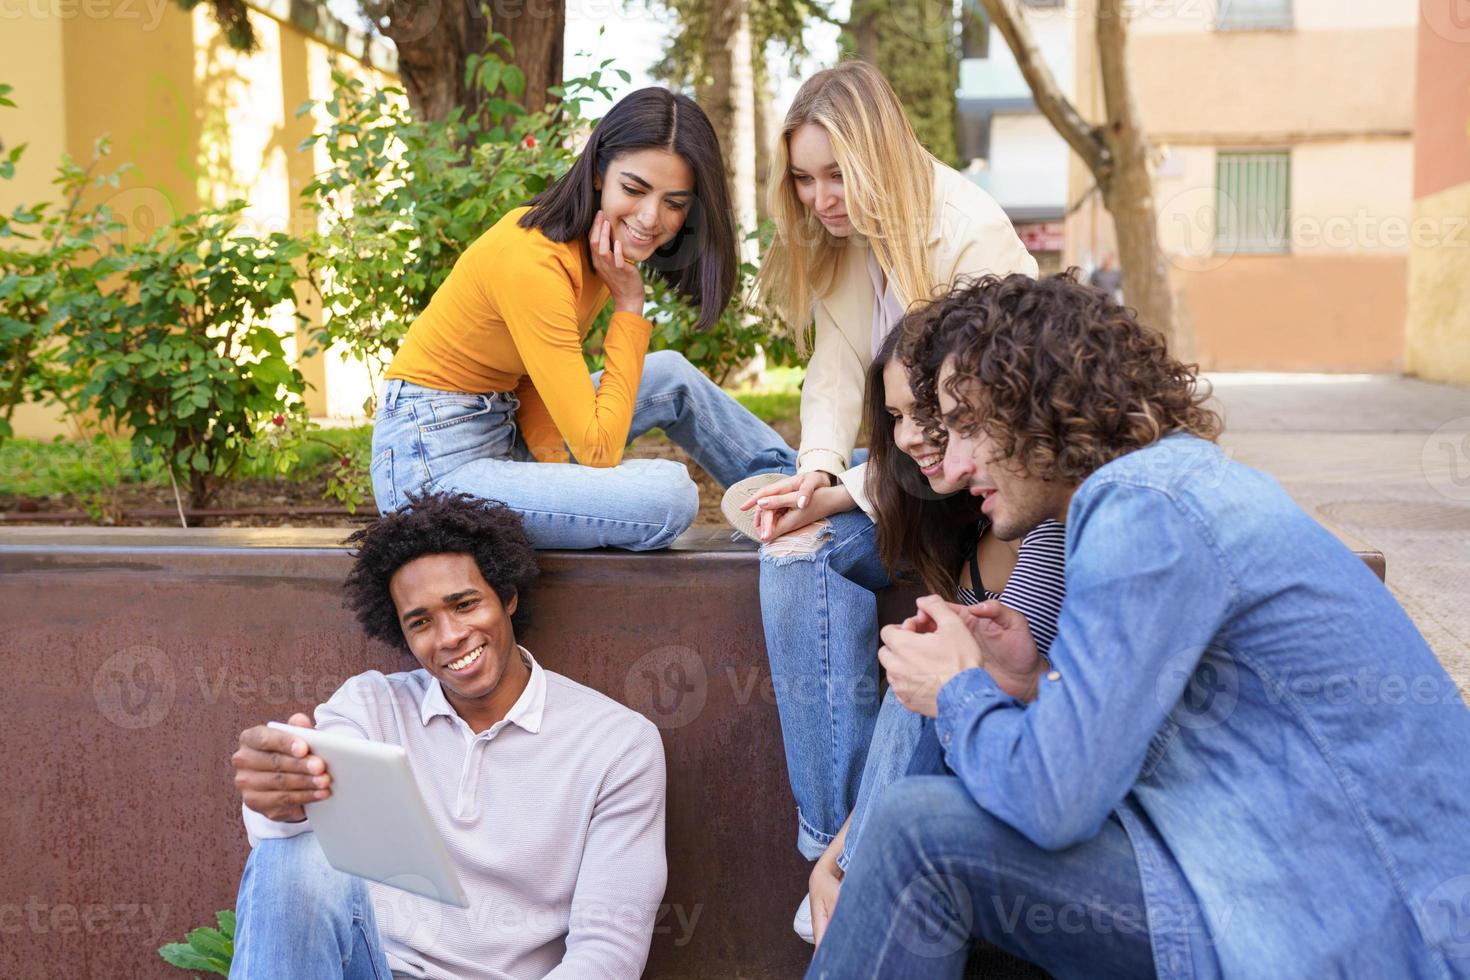 Multi-ethnic group of young people looking at a digital tablet outdoors in urban background. photo